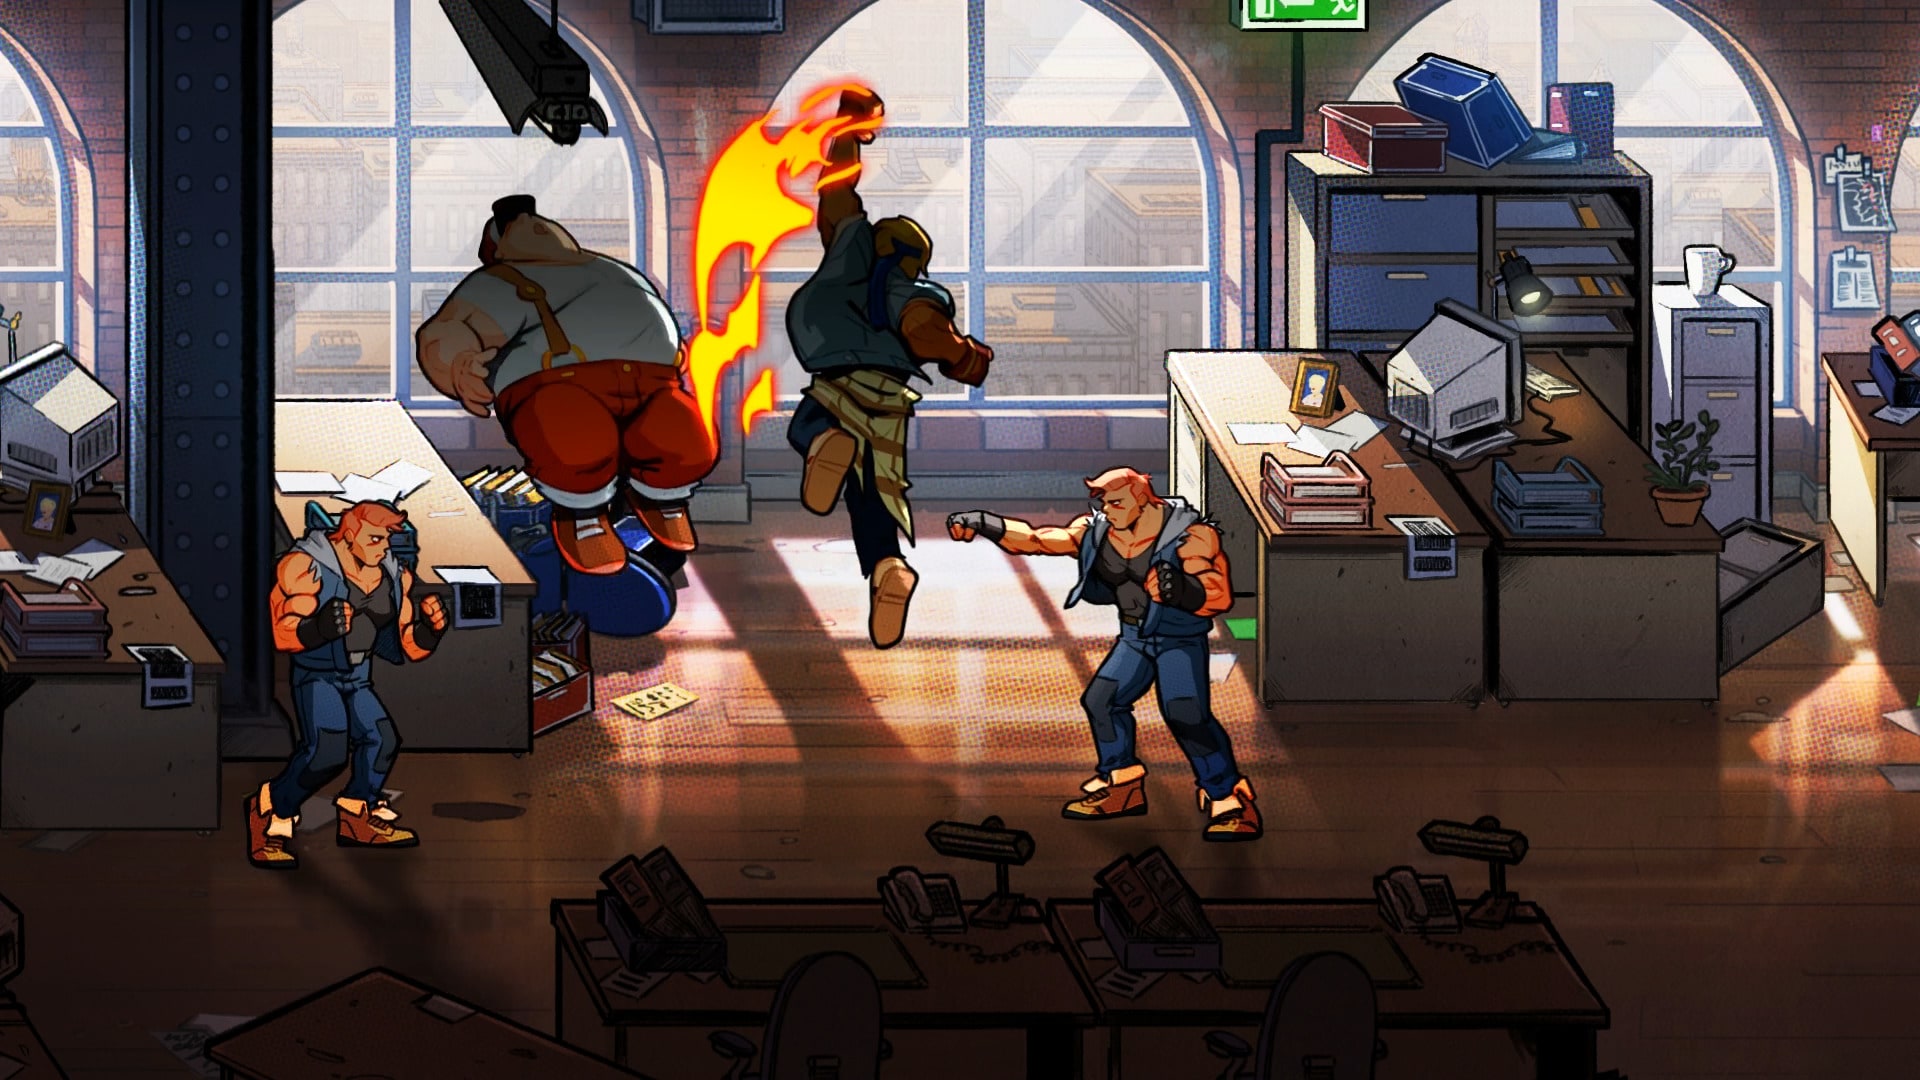 Video Game Streets of Rage 4 HD Wallpaper